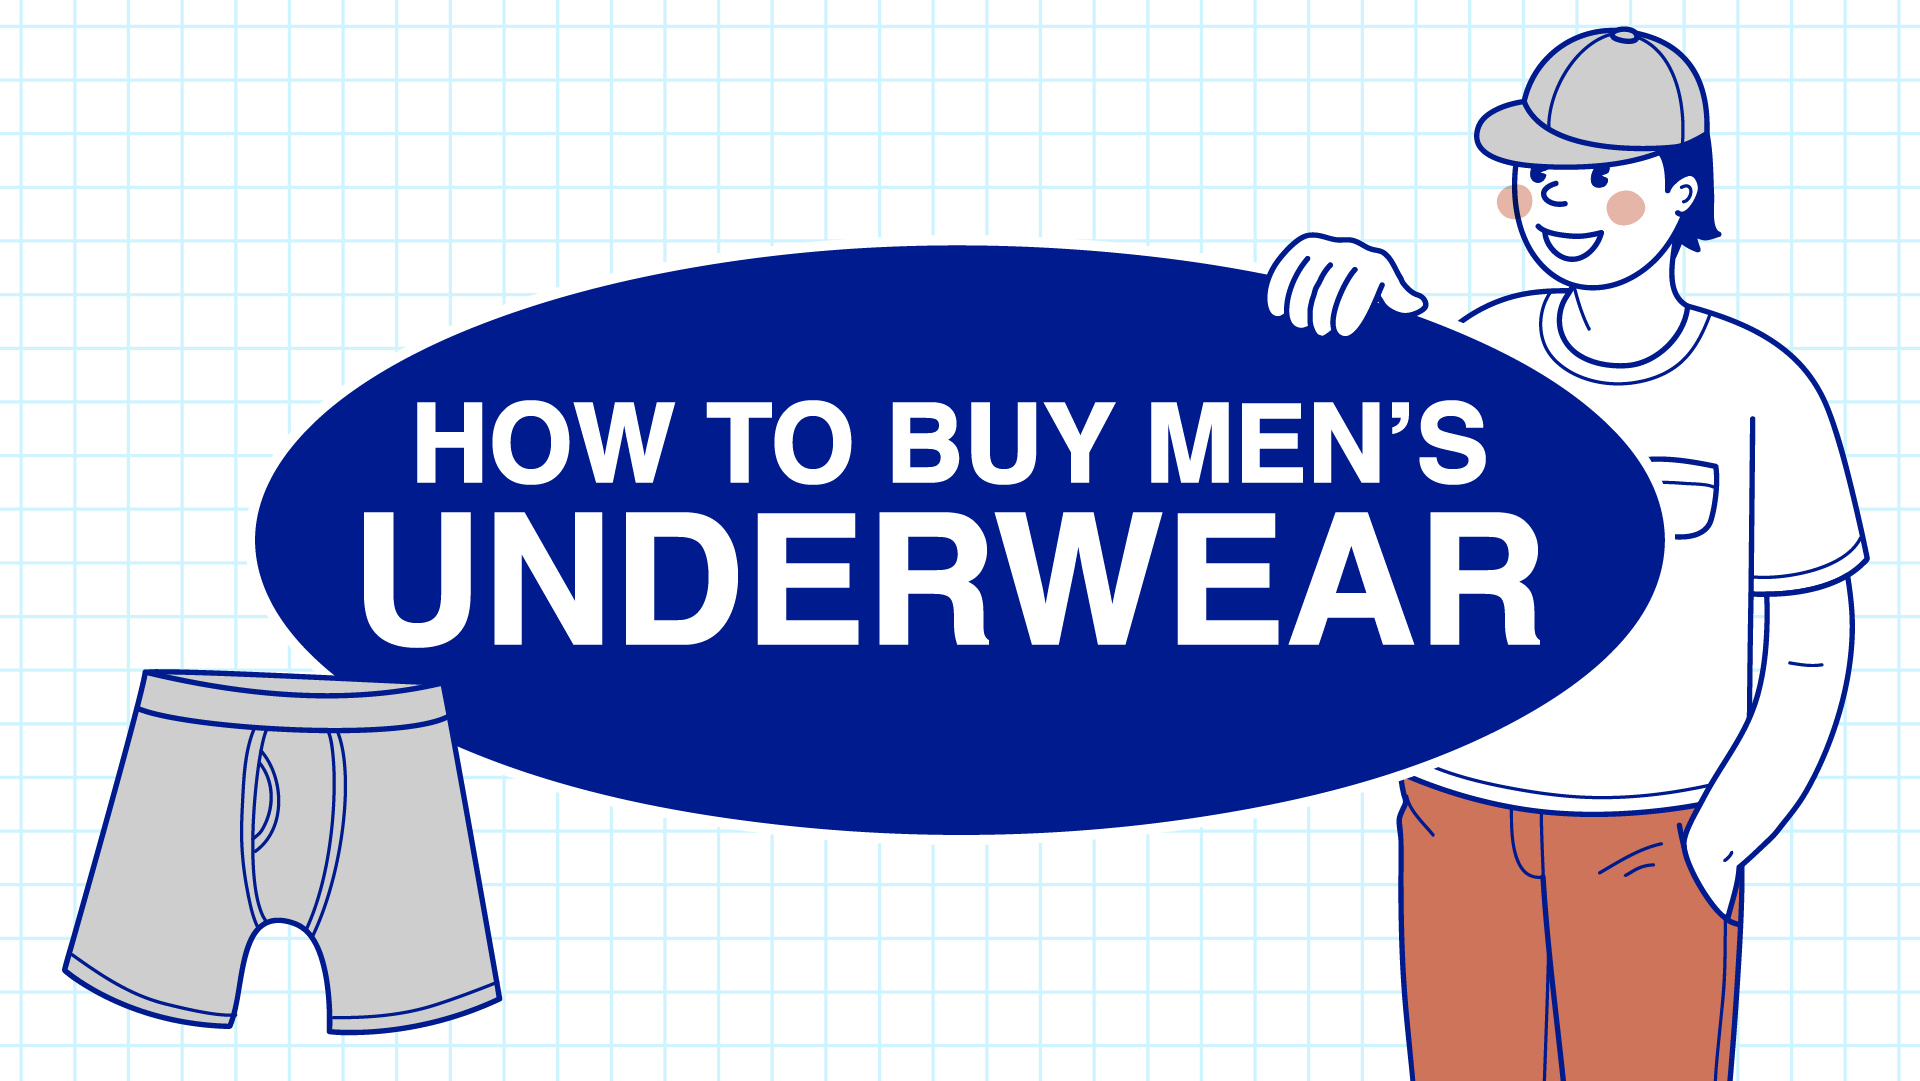 The Suggestion: Only wear underwear you love